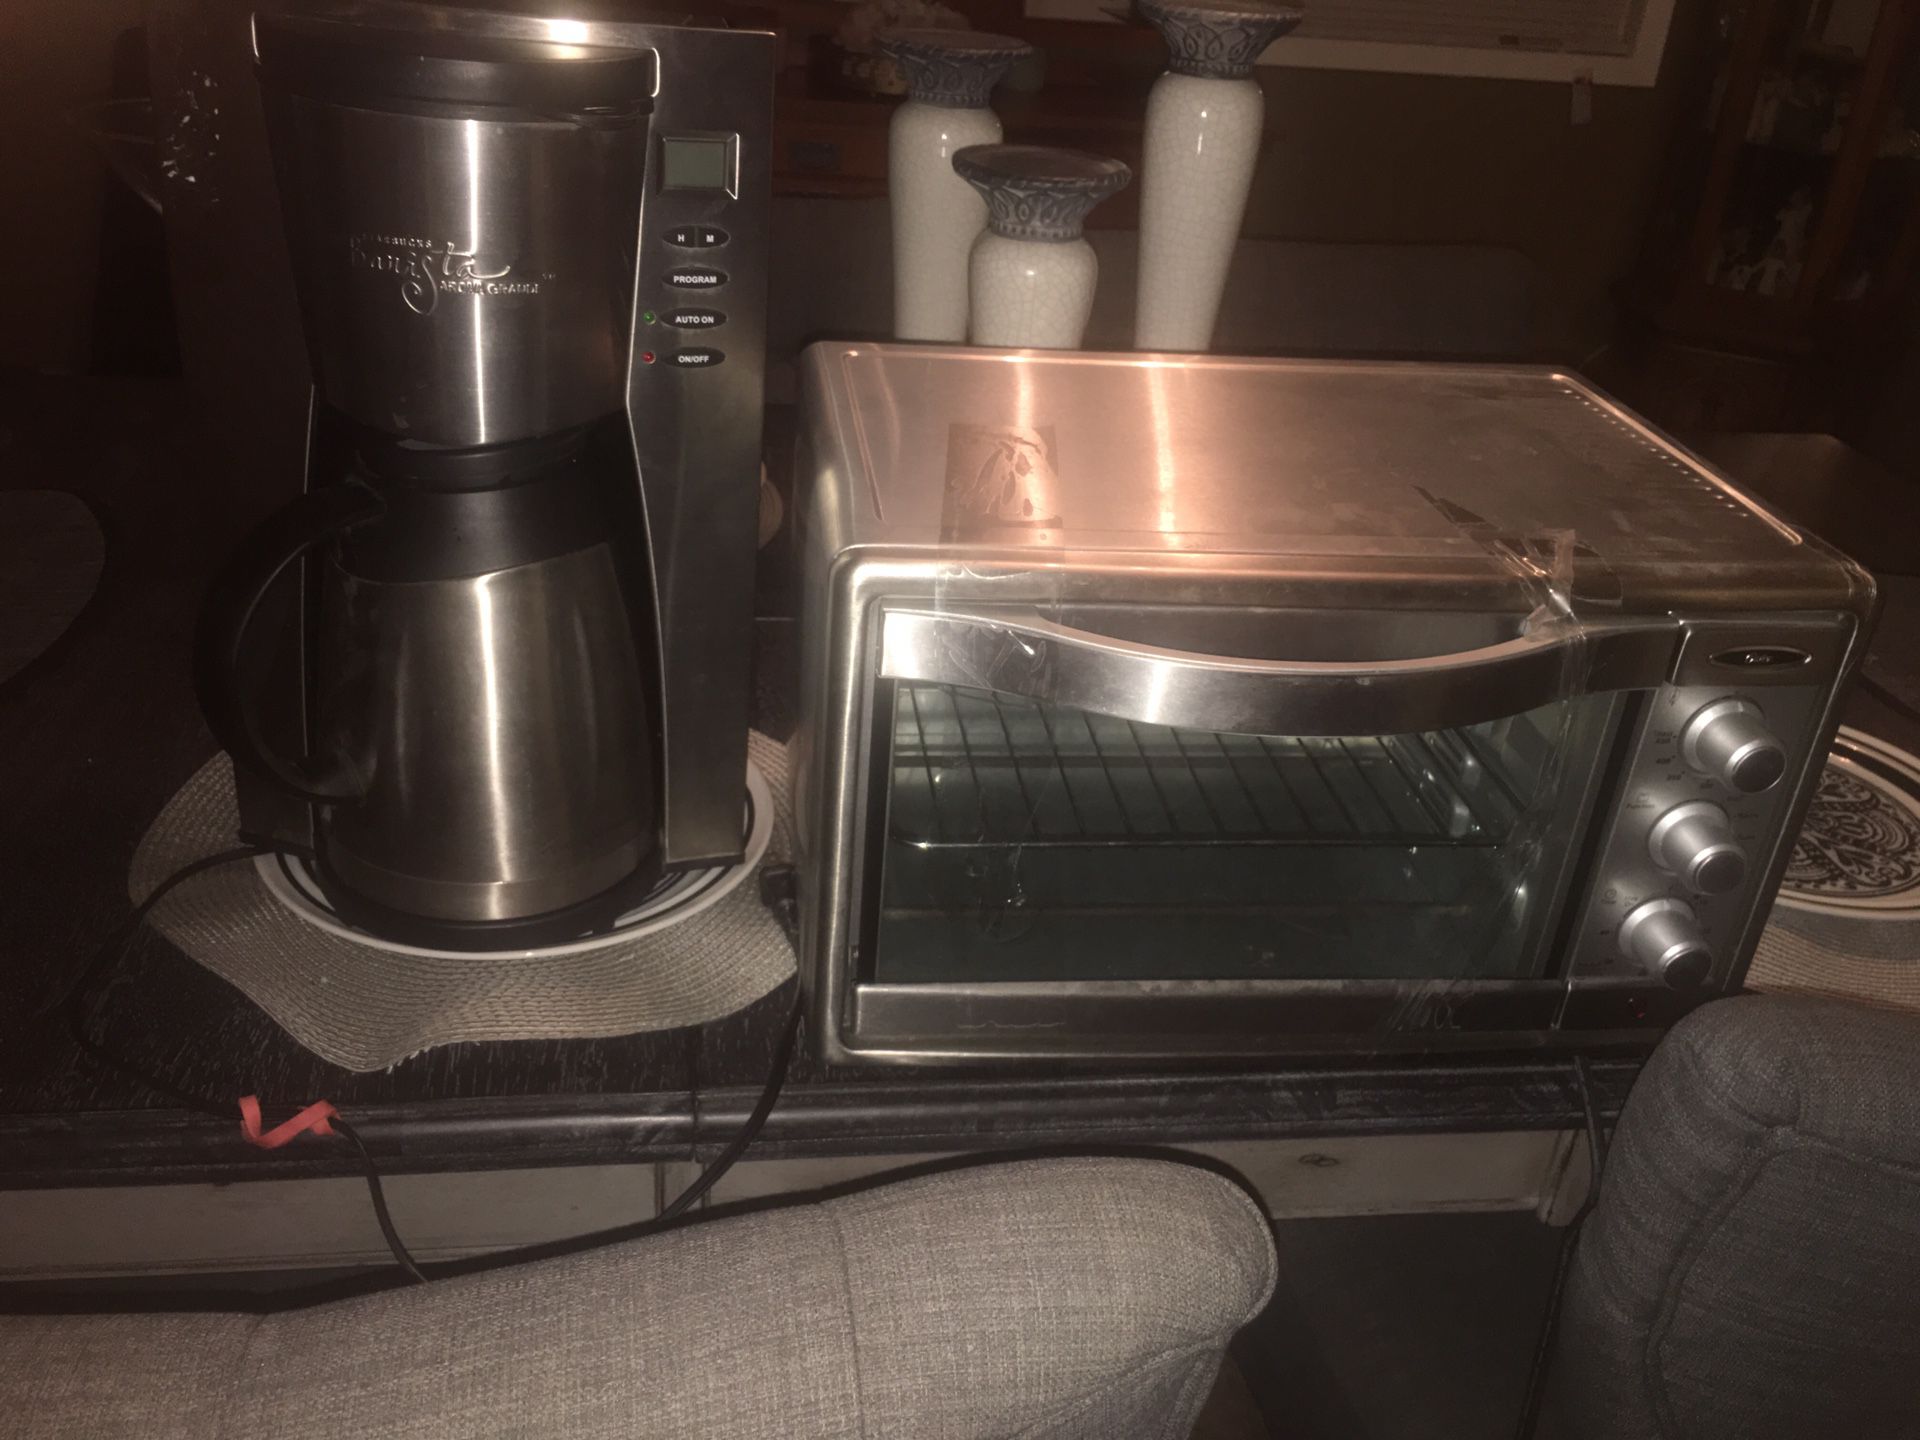 Starbucks barista coffee maker stainless steel and oster toaster oven